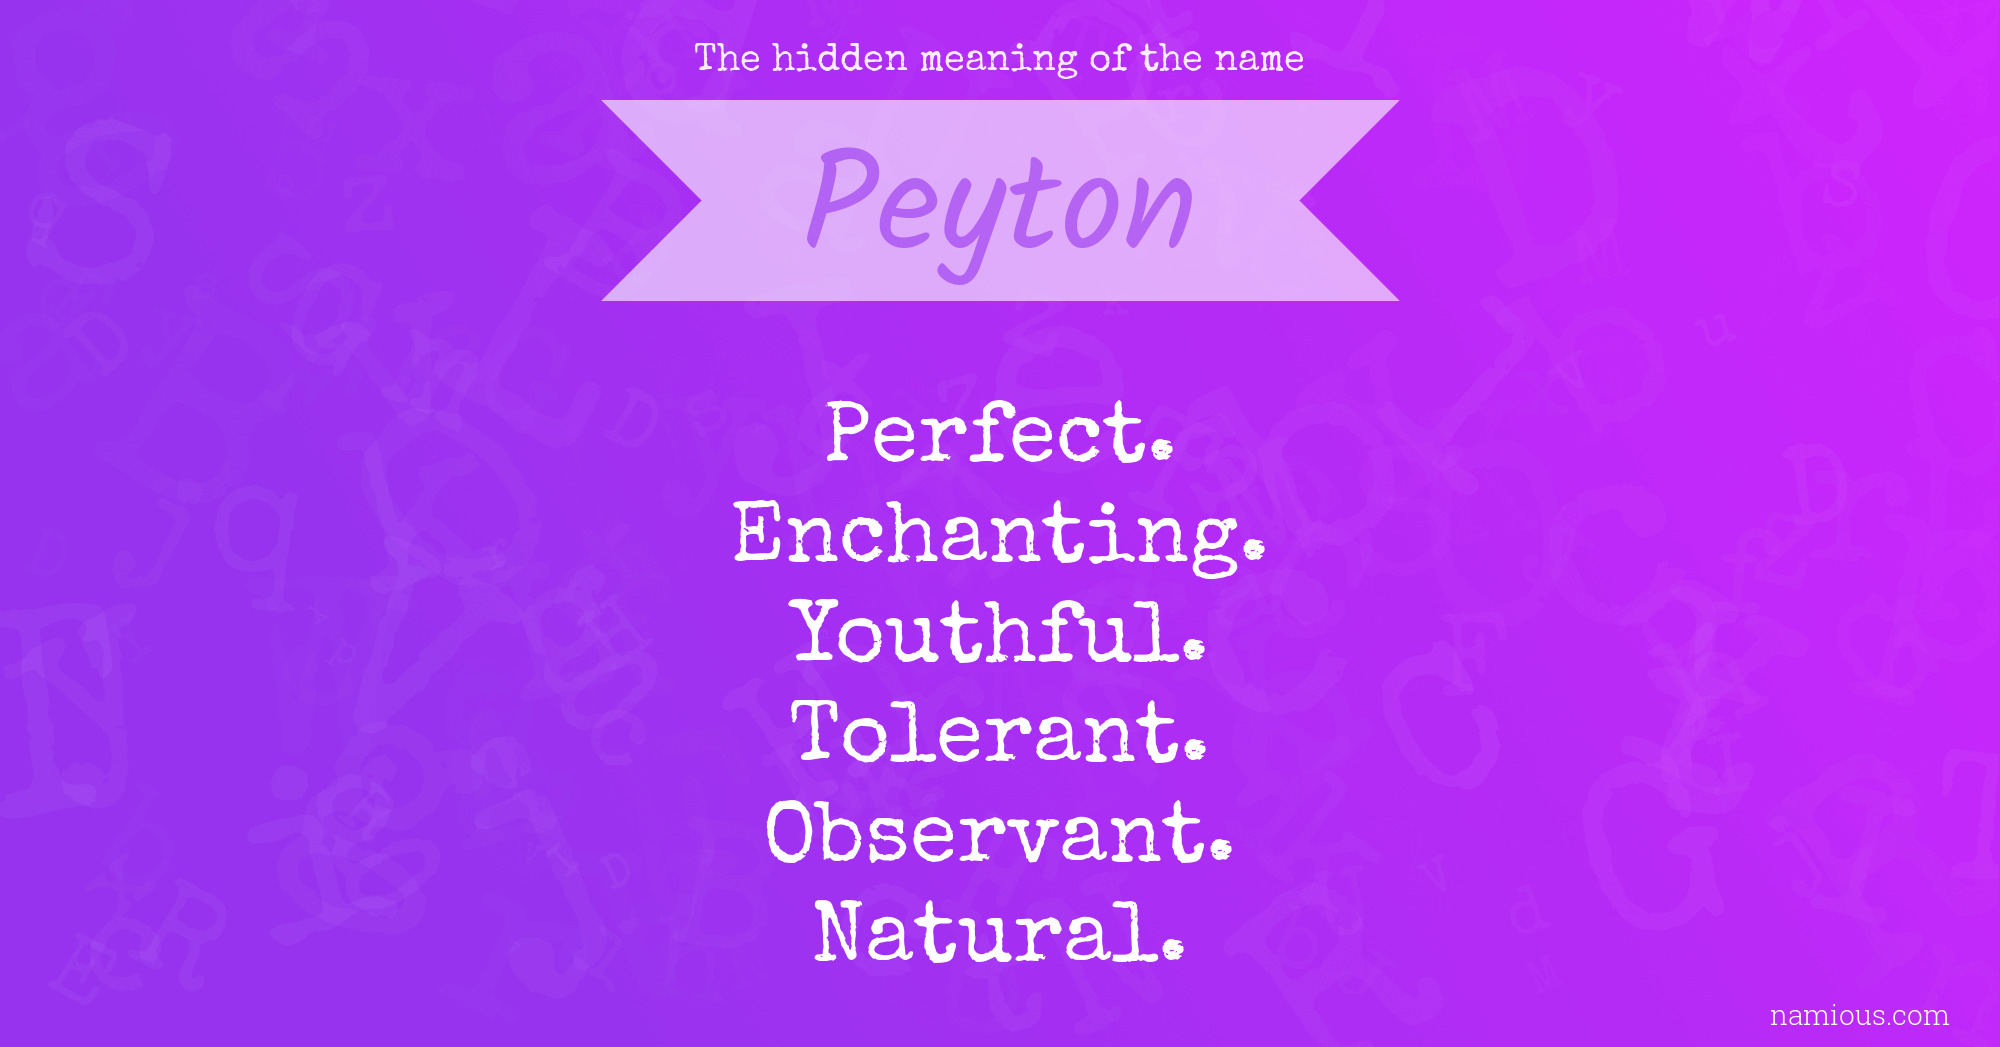 The hidden meaning of the name Peyton